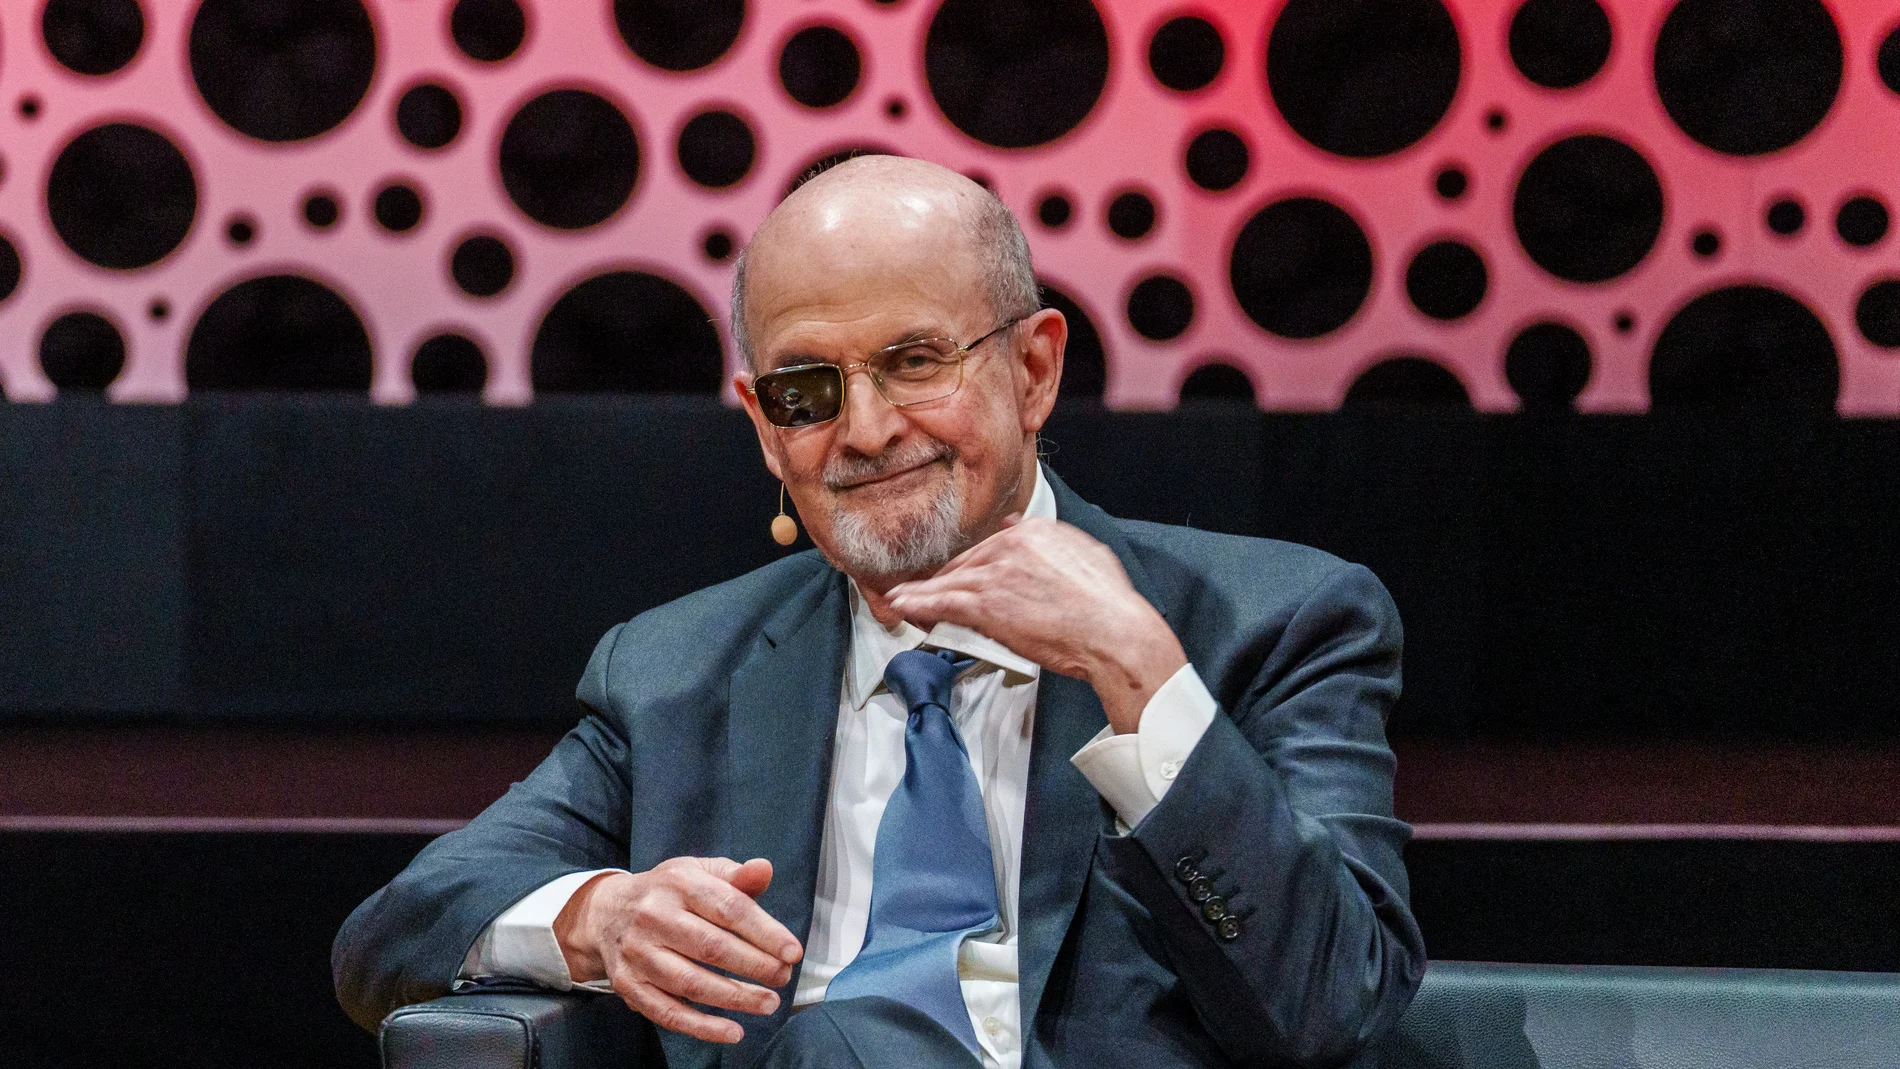 Author Salman Rushdie, winner of the Peace Prize of the German Book Trade 2023, sits on stage at the Literature Talk, in Frankfurt, Germany, Saturday, Oct 21, 2023. (Andreas Arnold/dpa via AP)